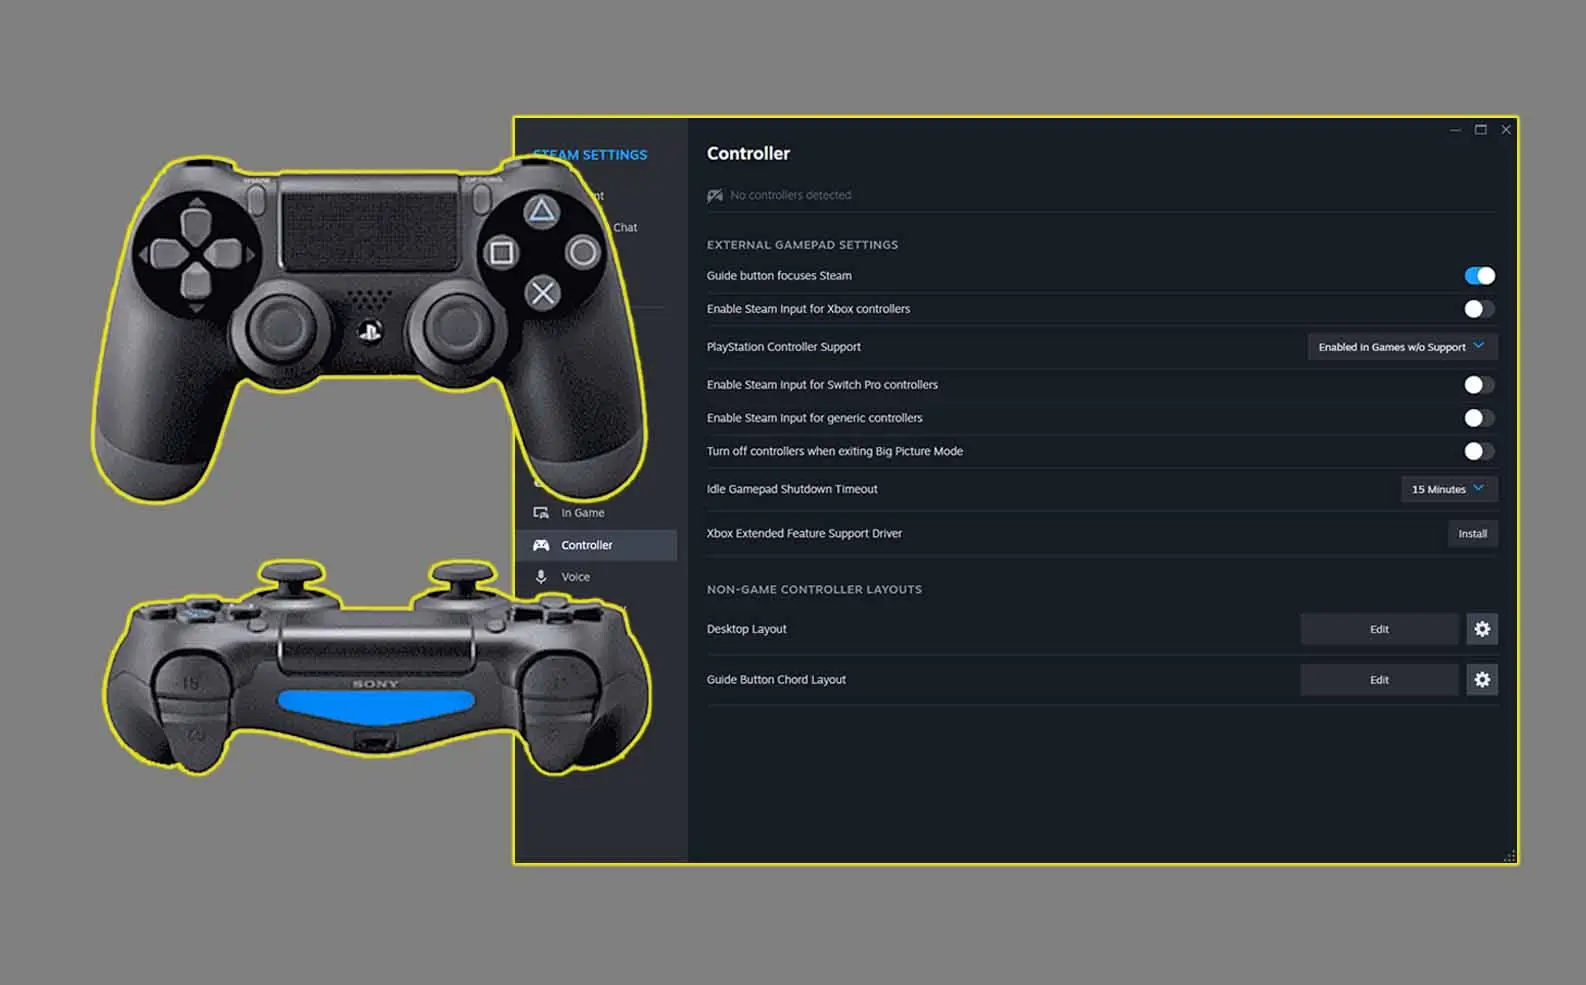 How to Use a PS4 Controller on Steam